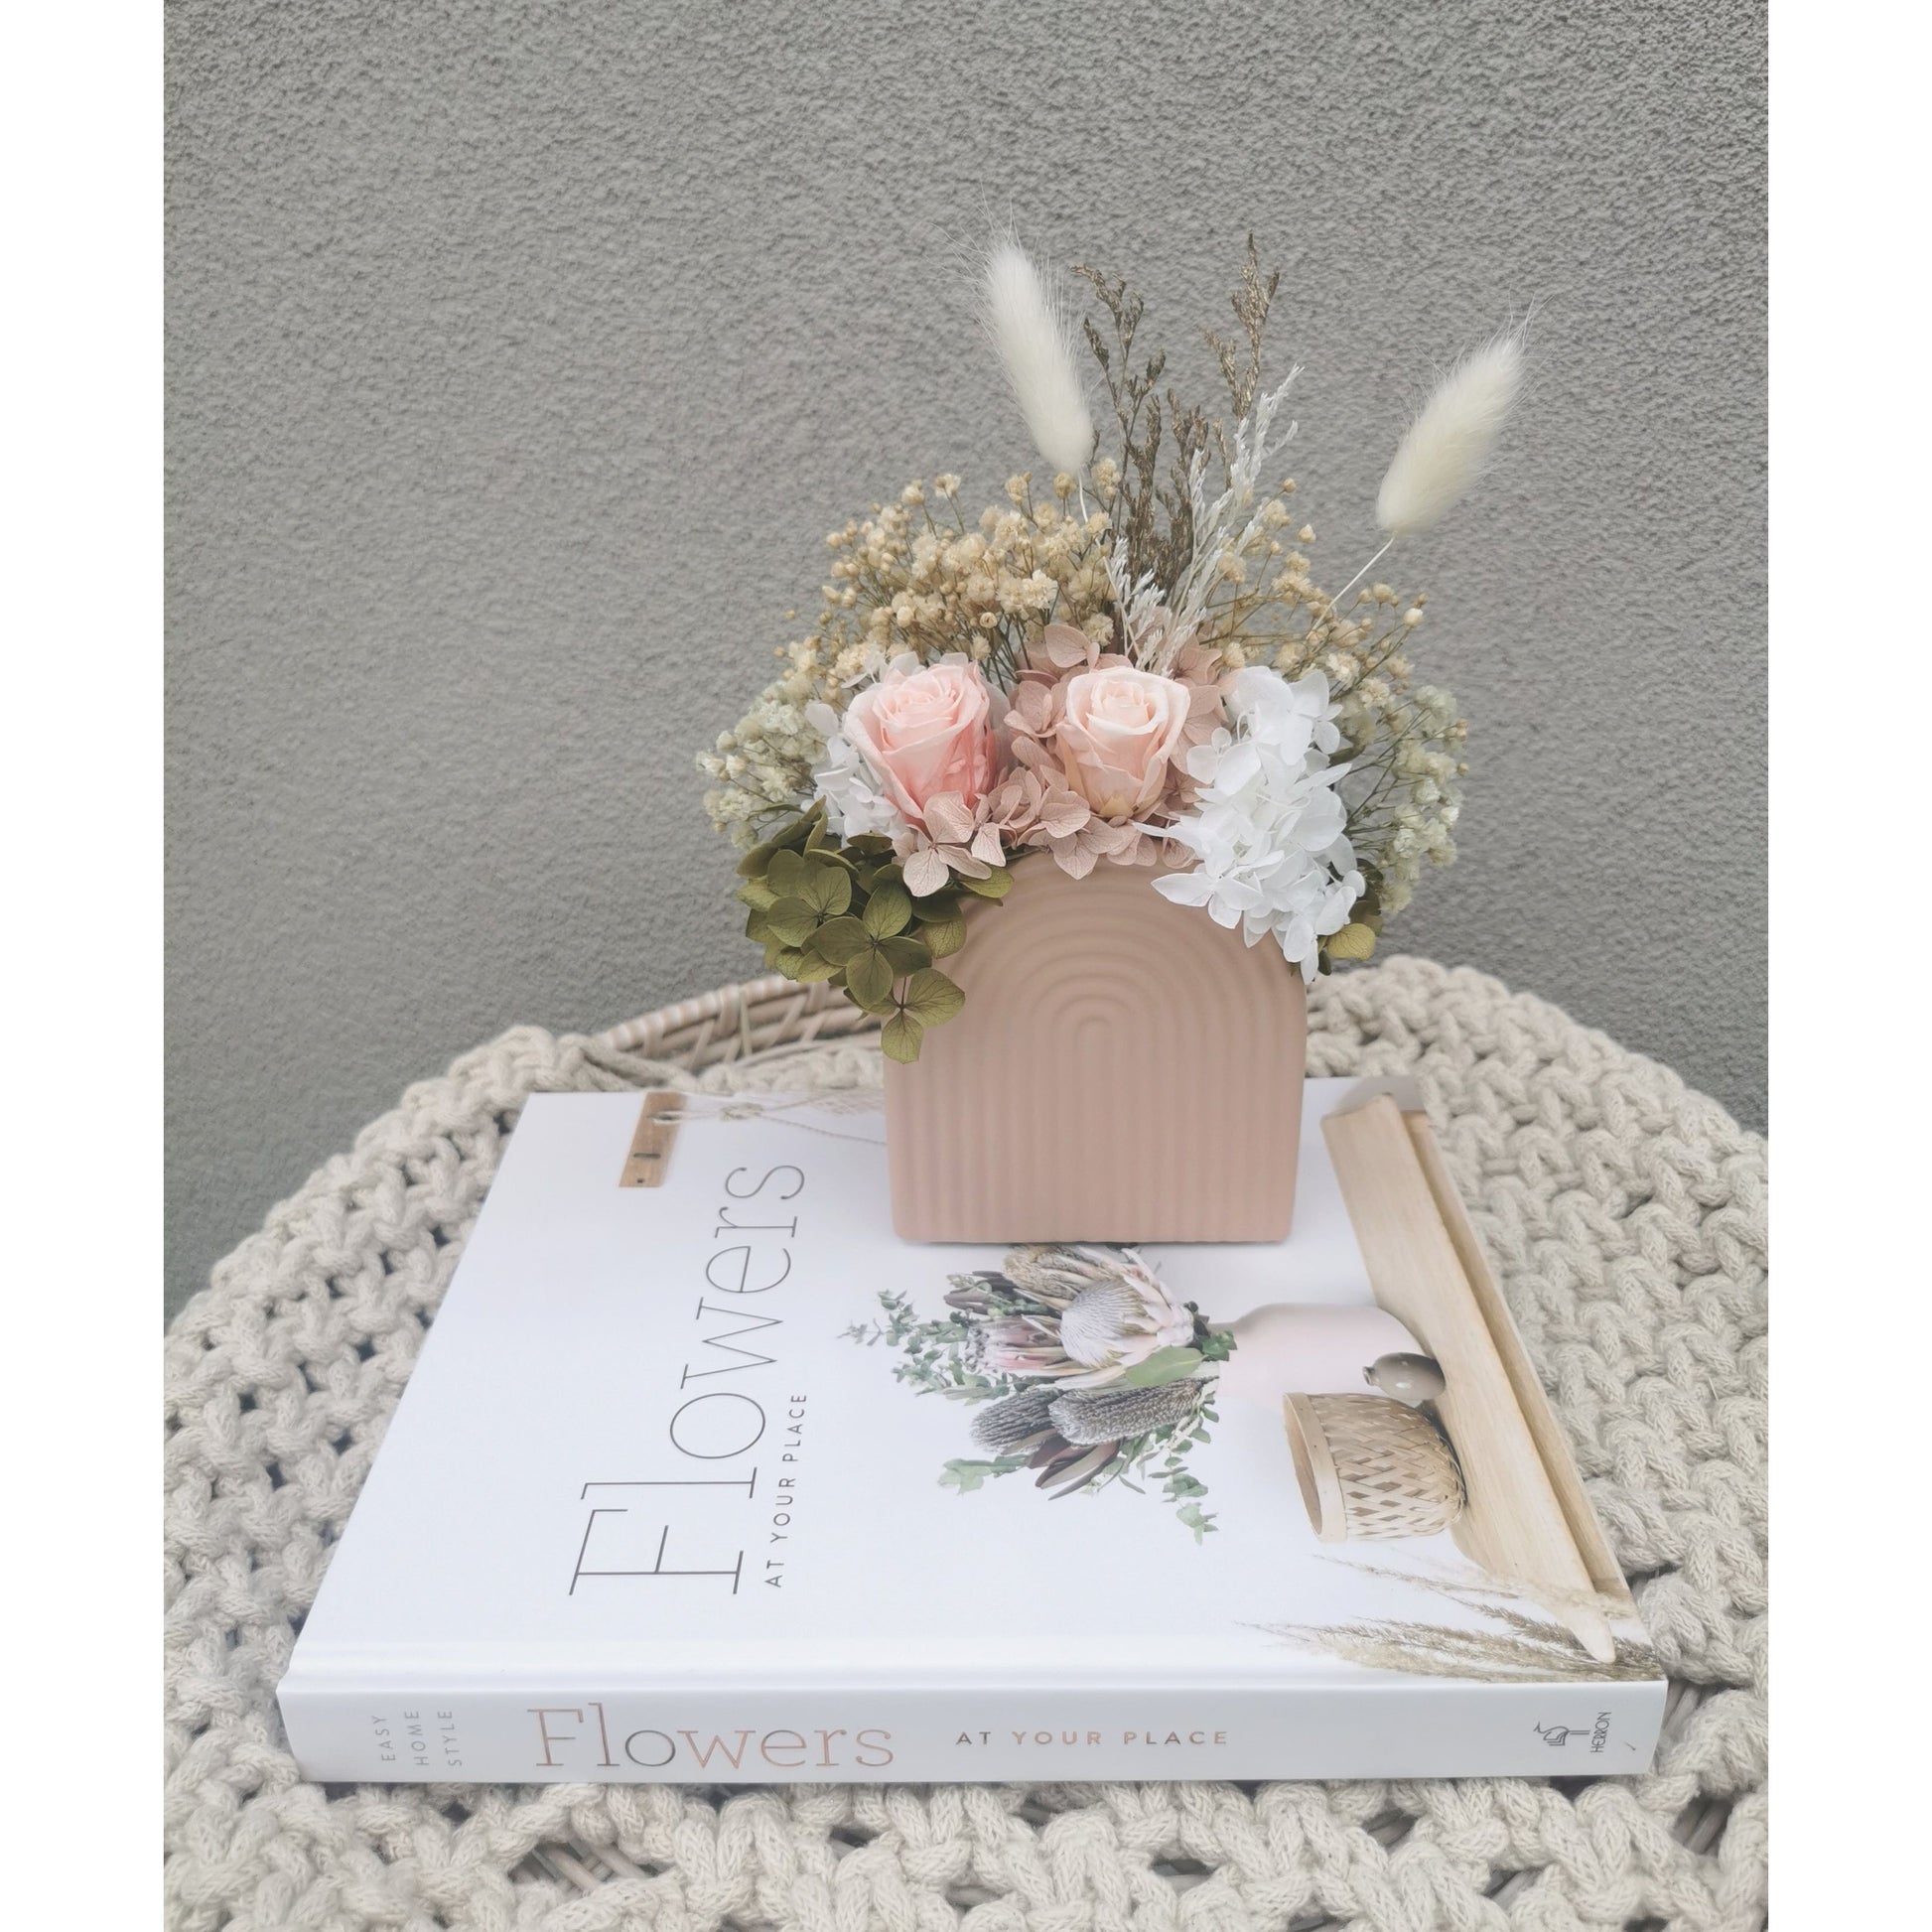 Dried & preserved flower arrangement featuring mini pink roses and pink, green & white dried flowers in a mini pink arch vase. Photo shows arrangement sitting on a book in front of a blank wall